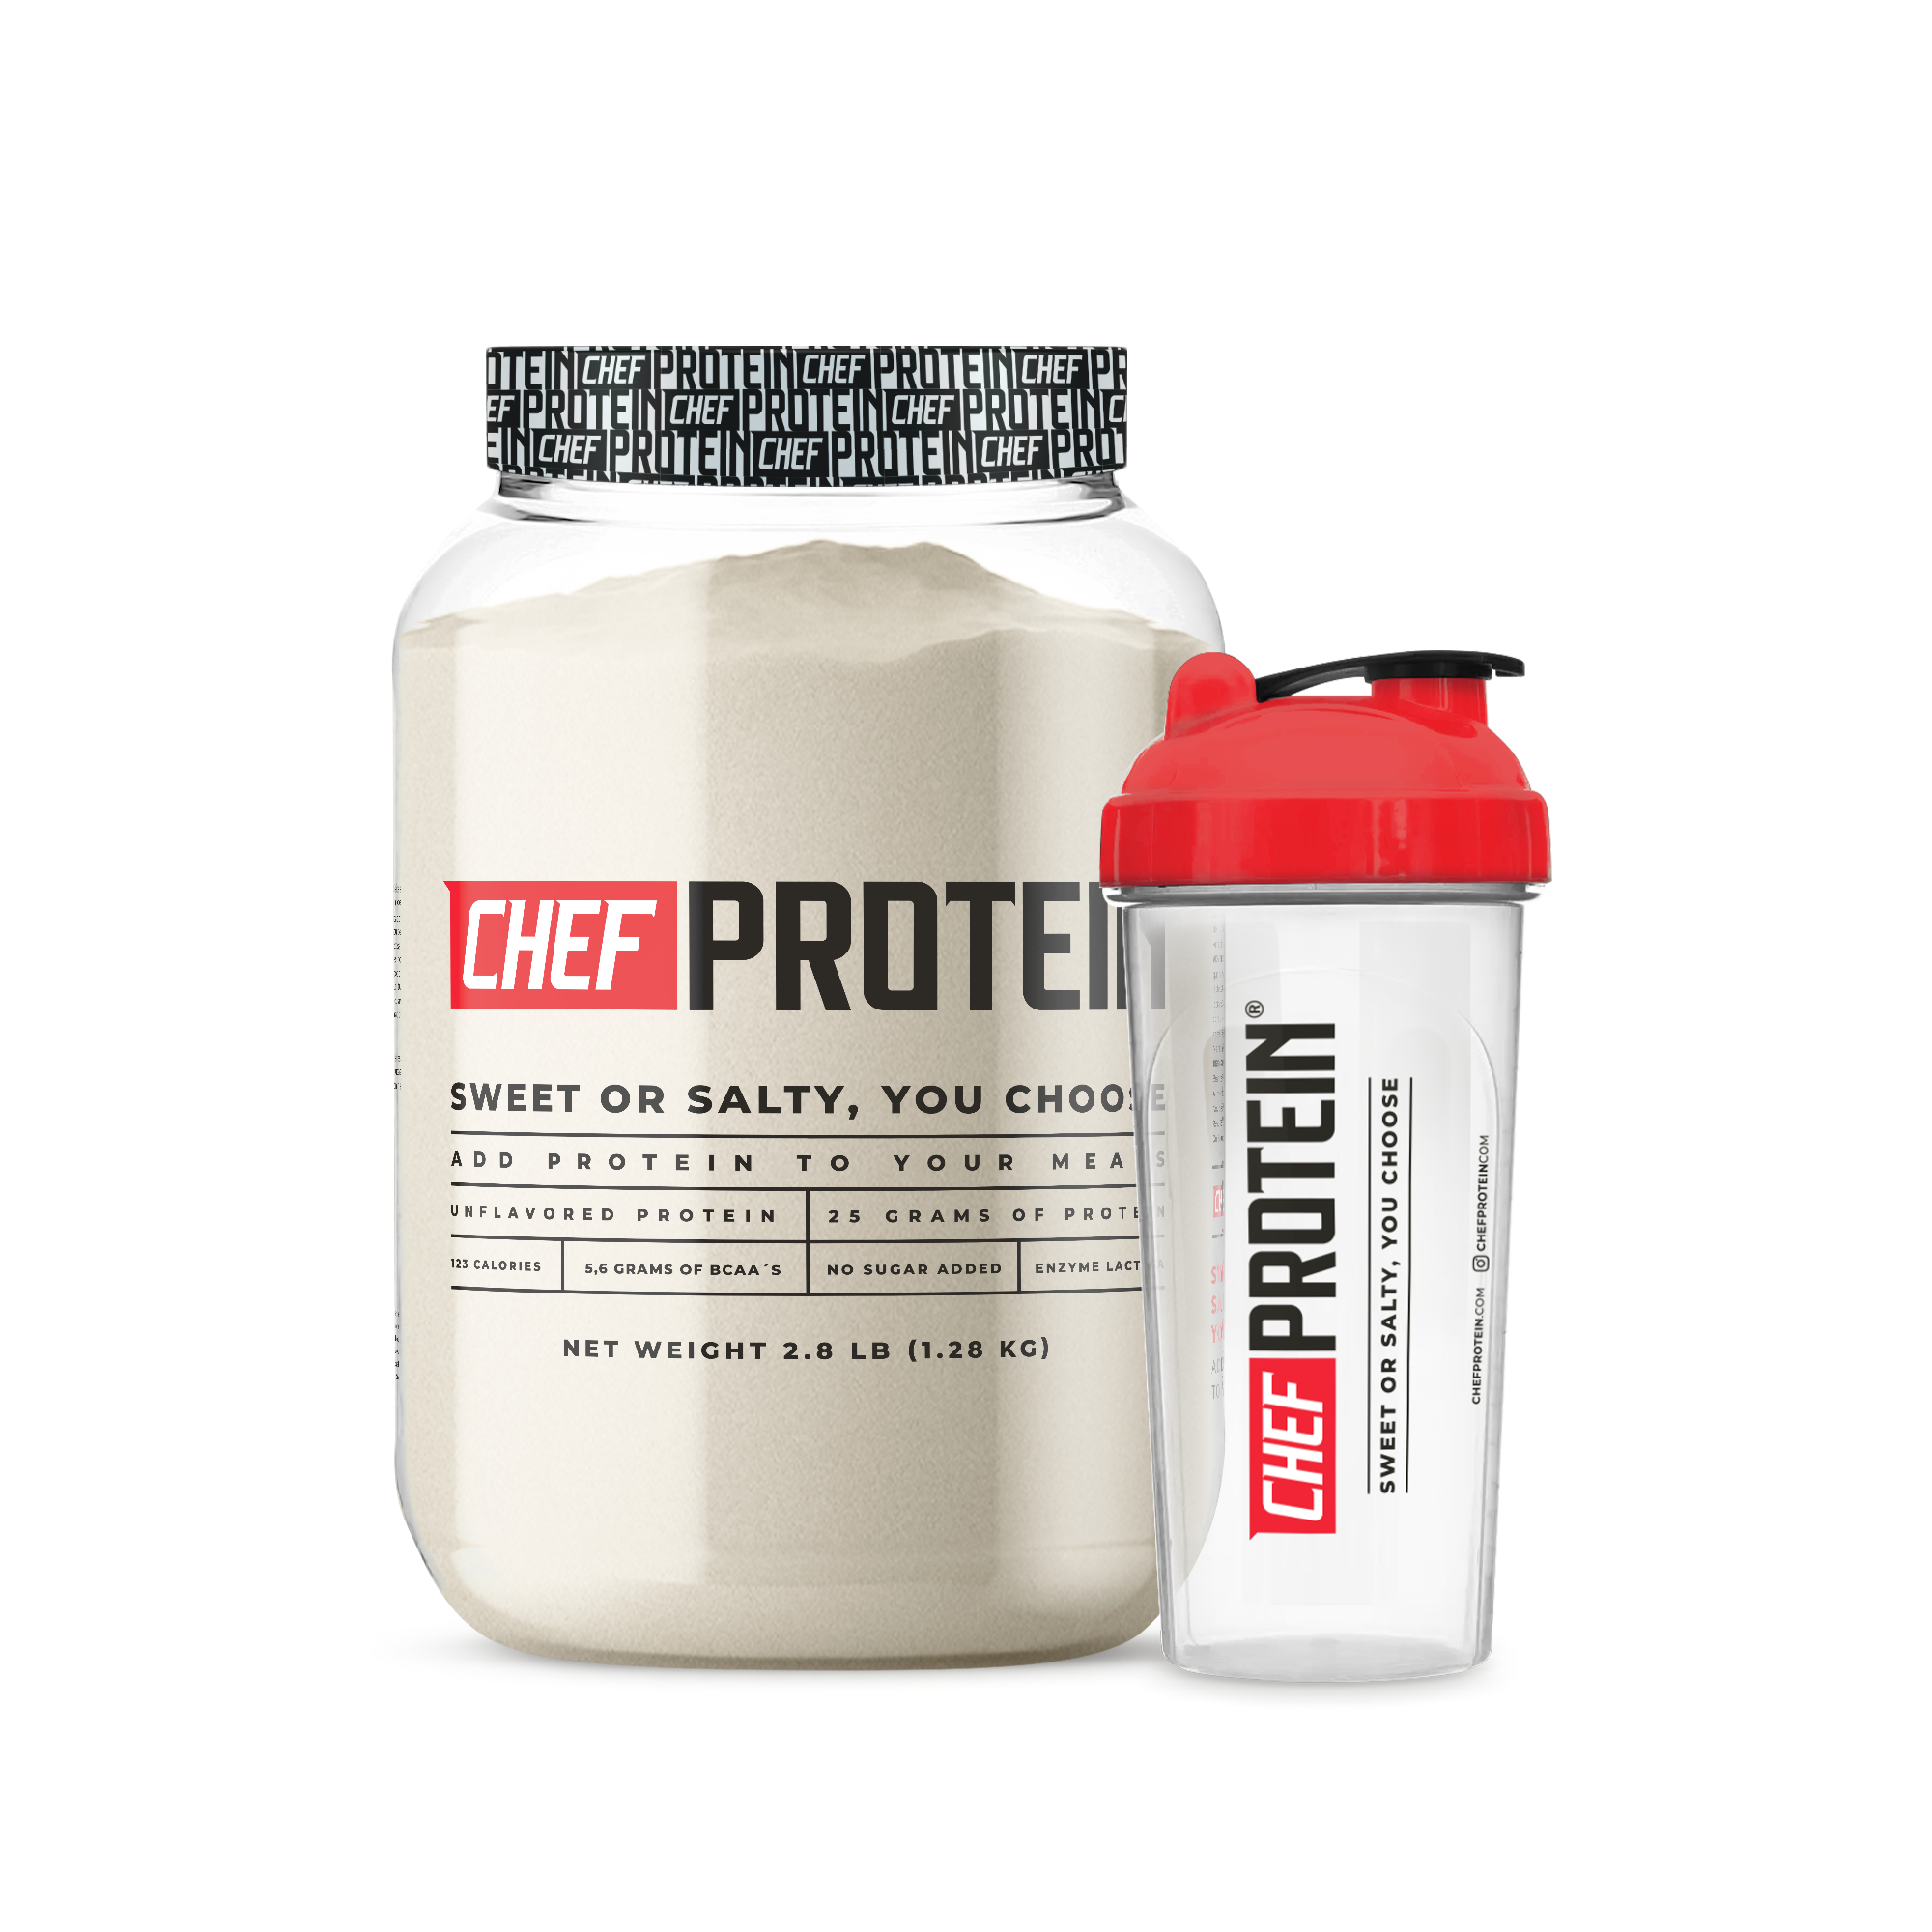 Chef Protein Whey Unflavored + Shaker